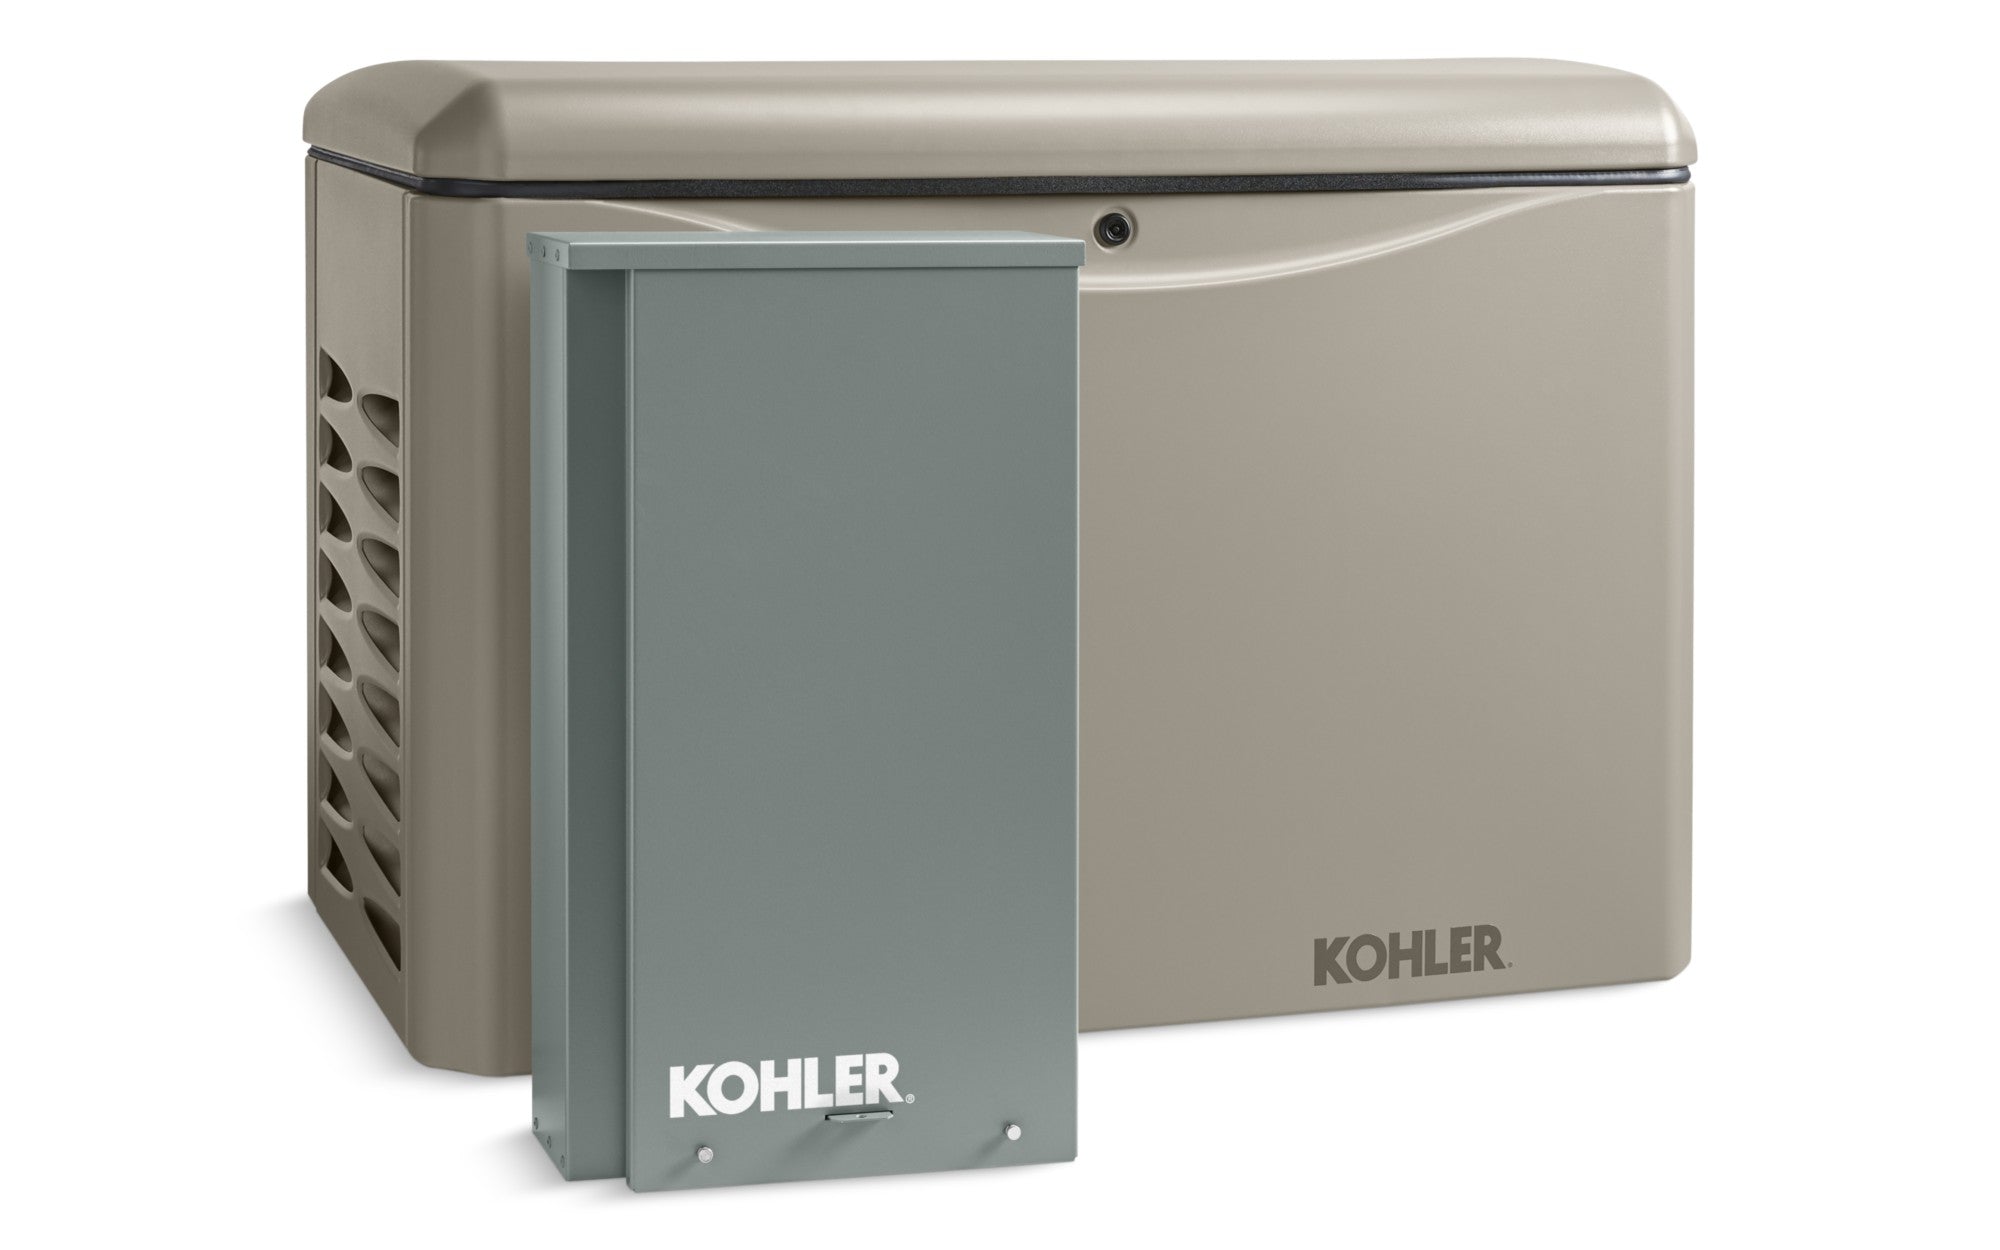 Kohler 26RCAL-200SELS Air-Cooled Standby Generator with 200 Amp Transfer Switch Single Phase, 26,000-Watt